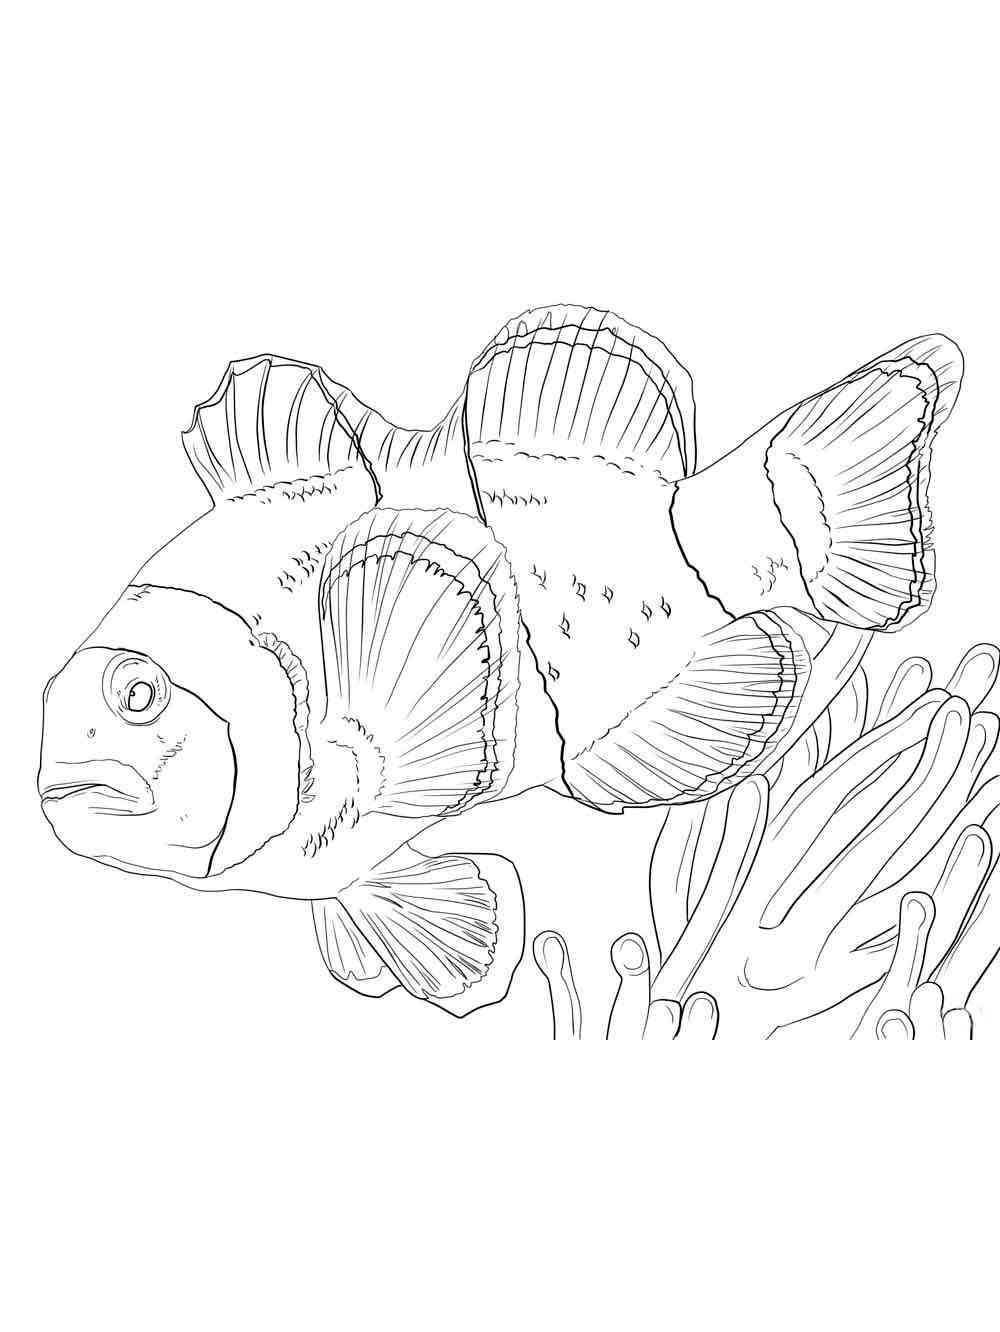 Clownfish 10 coloring page